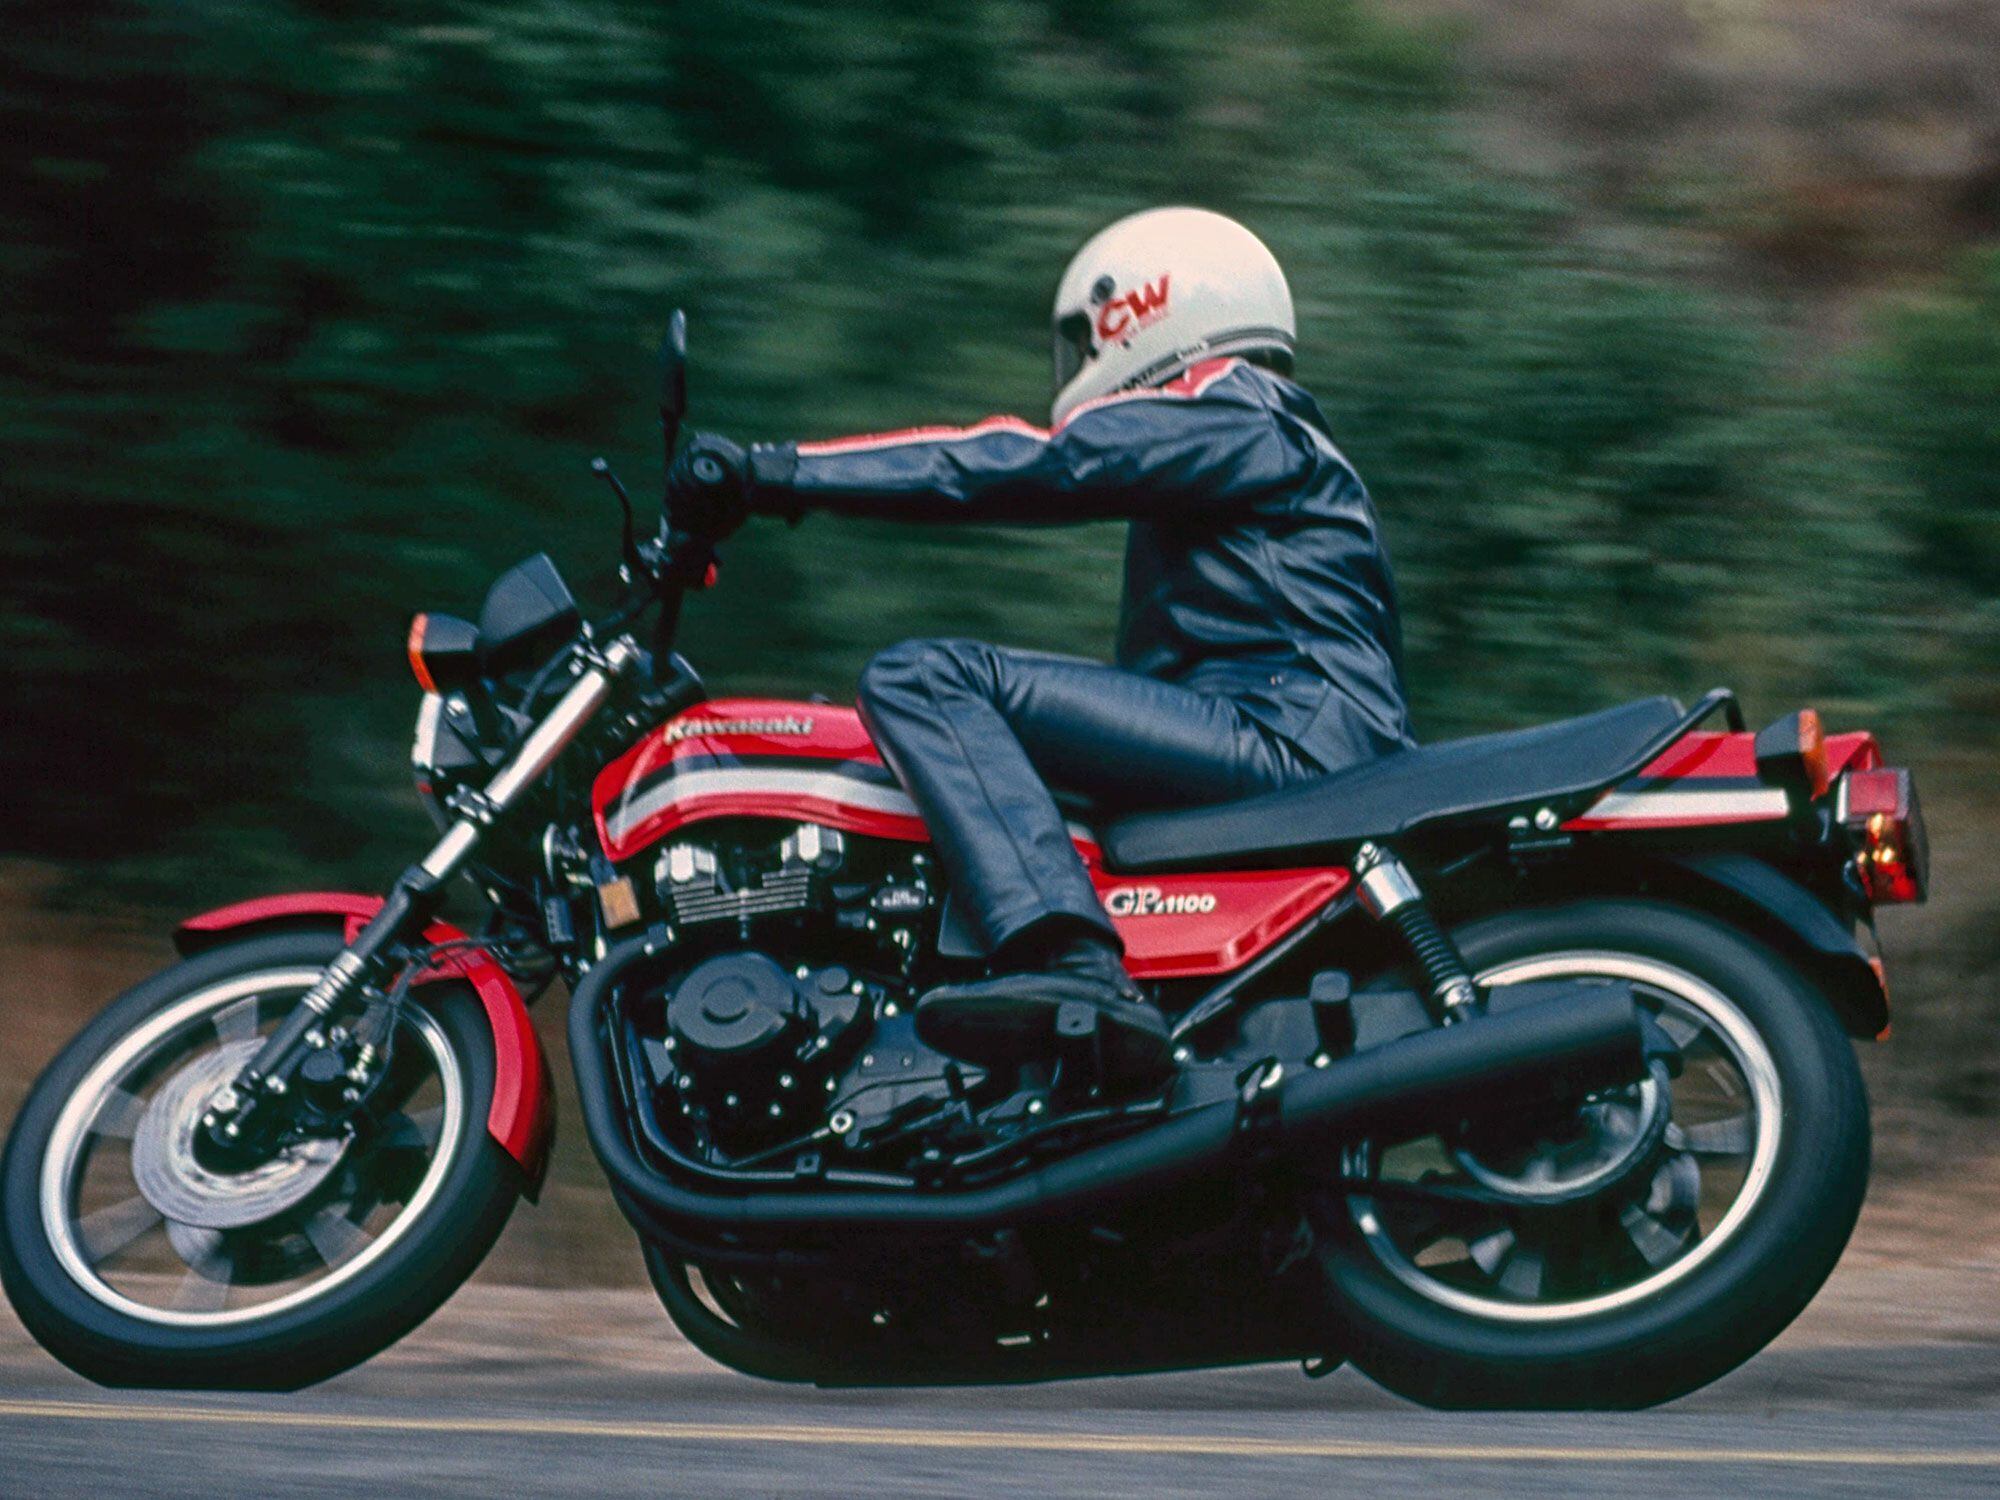 Kawasaki’s 1981 GPz1100 shared many of the 550’s styling cues but did not find the same success.